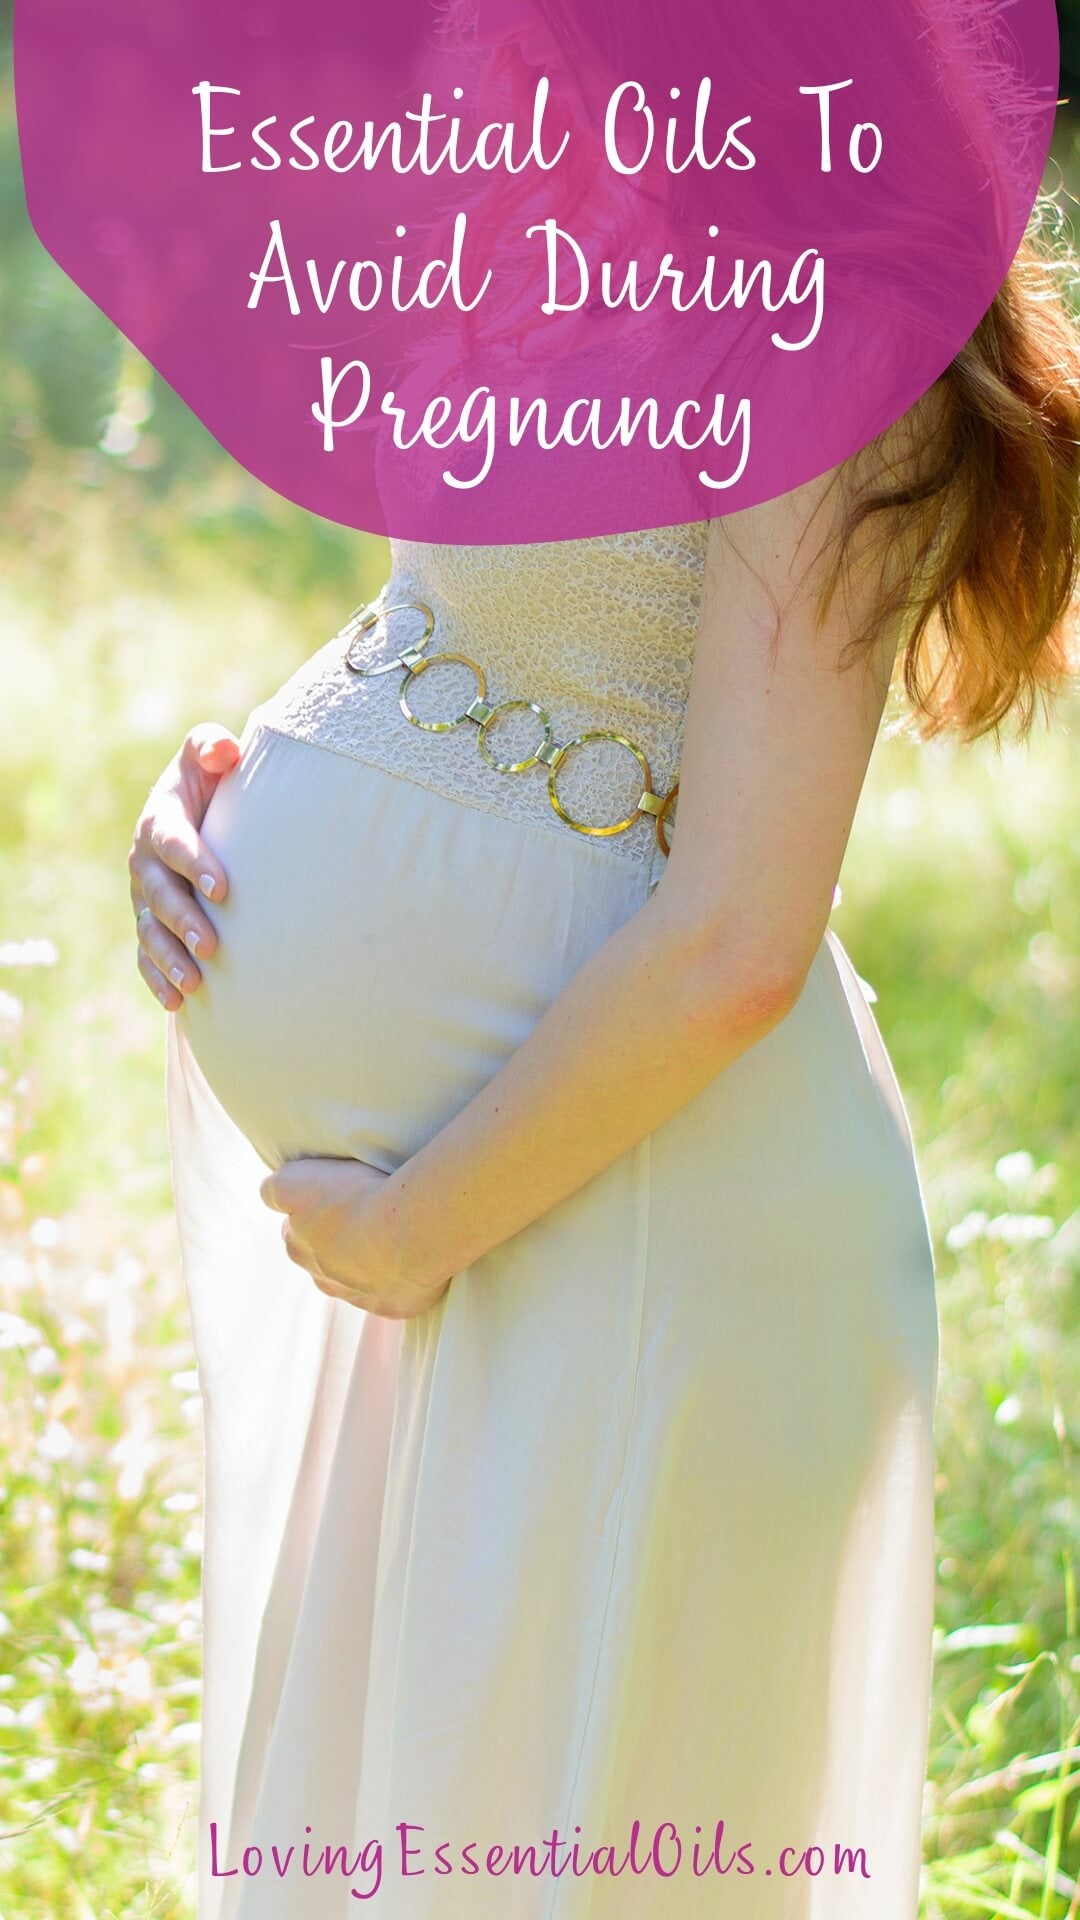 Essential Oils To Avoid During Pregnancy by Loving Essential Oils